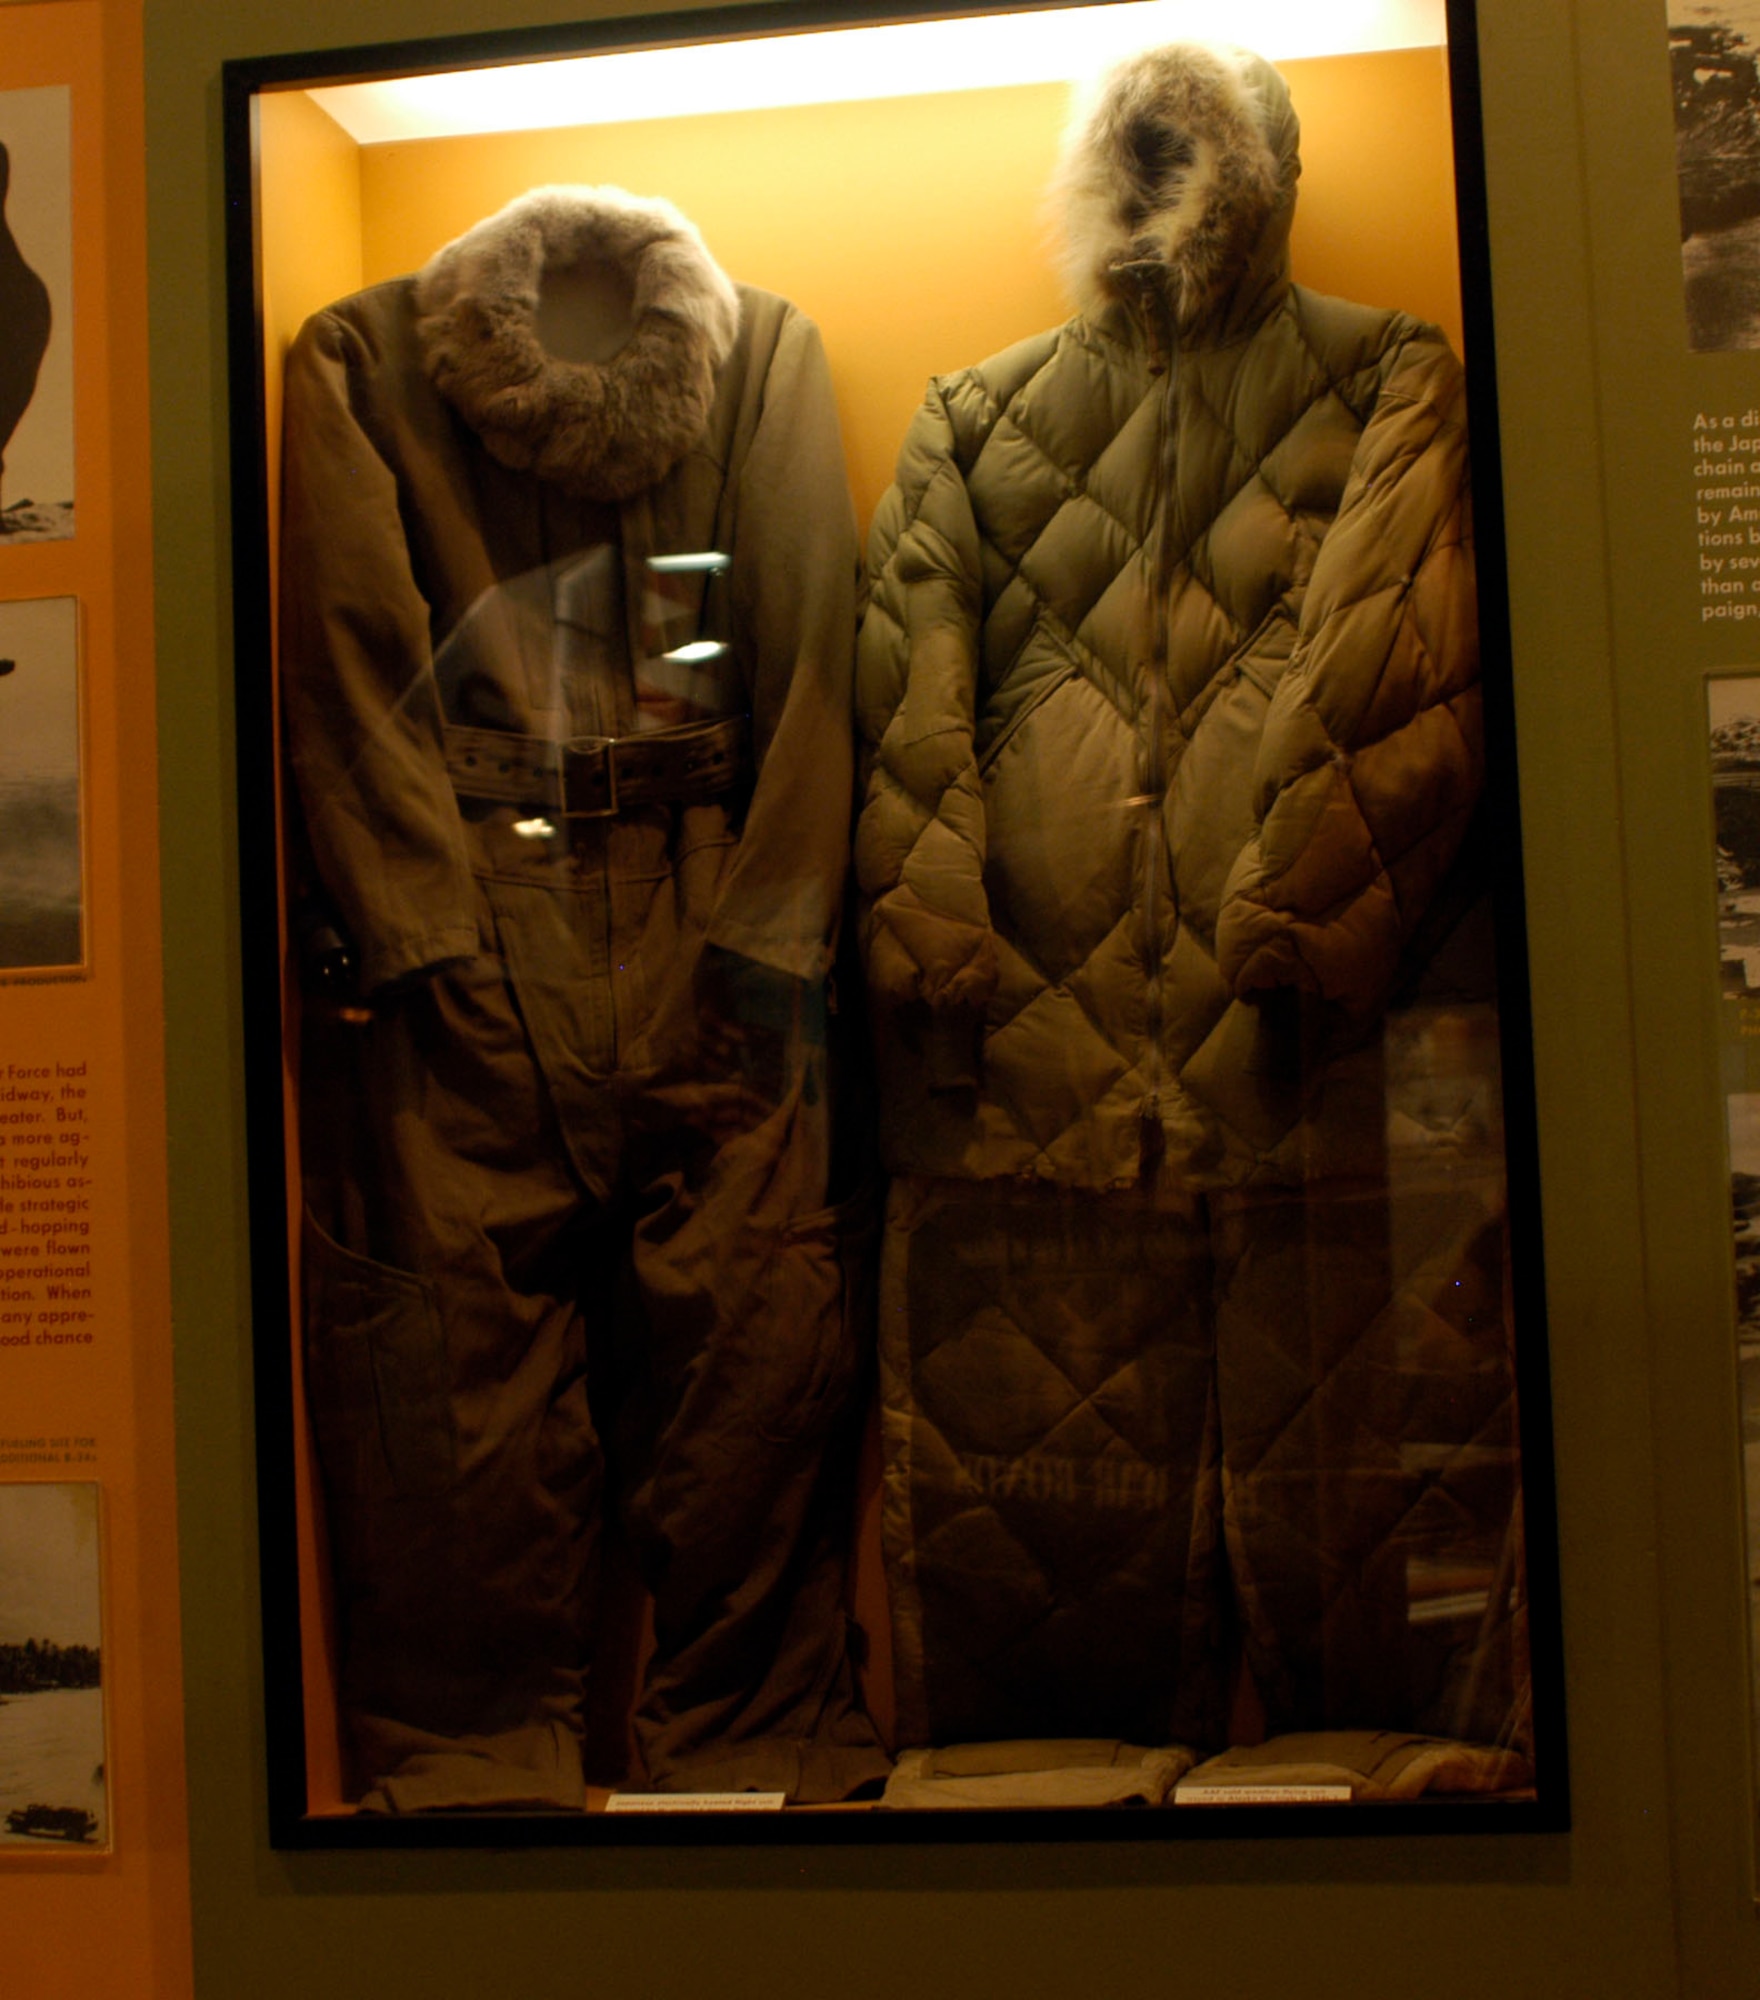 DAYTON, Ohio -- On the left is a Japanese electrically heated flight suit, and on the right is an AAF cold weather flying suit issued in Alaska for trials in 1941-1942. The Japanese flight suit was donated by Jacques E. Young from Dayton, Ohio. The AAF suit was donated by Col. (Ret.) F.B. Gallagher from Pinellas, Fla. Both are on display in the World War II Gallery at the National Museum of the U.S. Air Force. (U.S. Air Force photo)